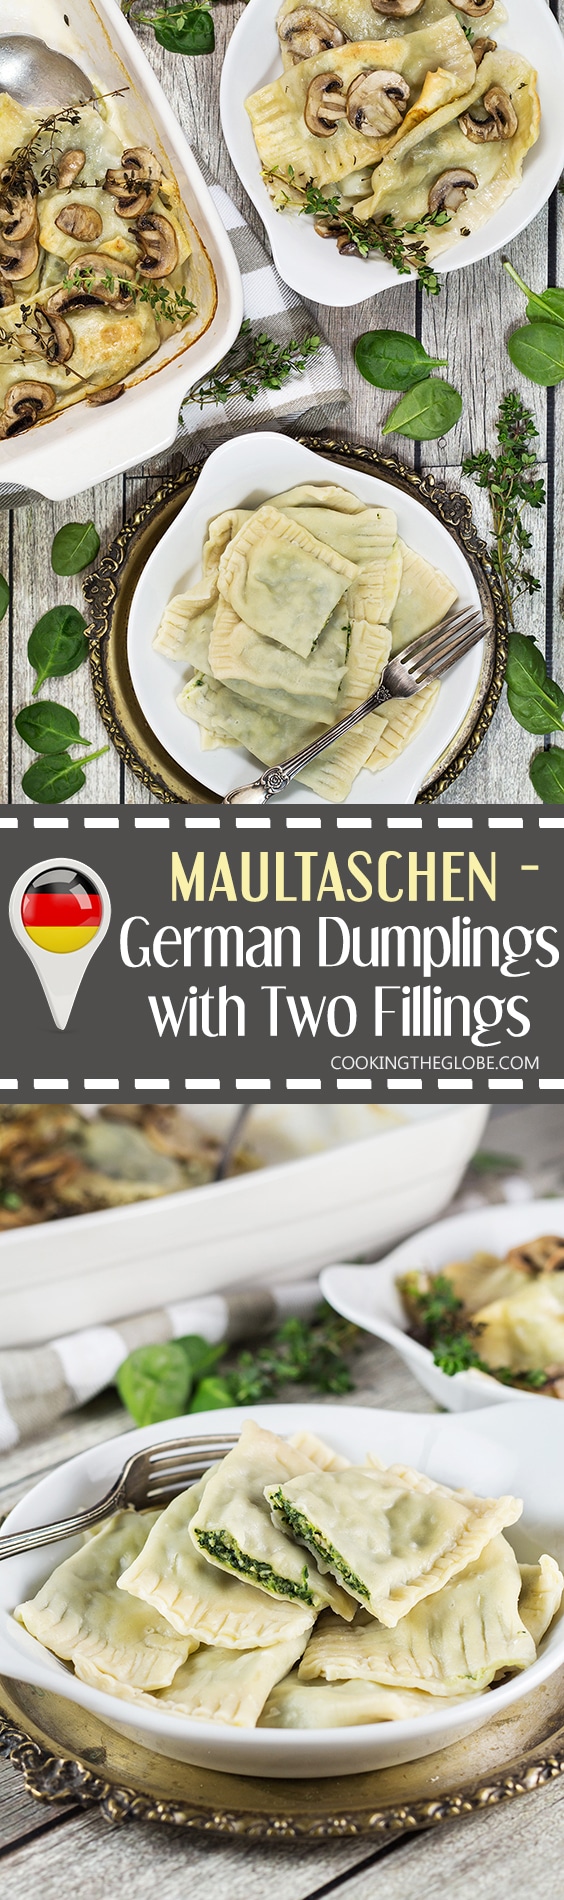 Maultaschen is a German version of Italian ravioli dumplings, only way bigger. This recipe features two different fillings: a traditional and a modern one! | cookingtheglobe.com